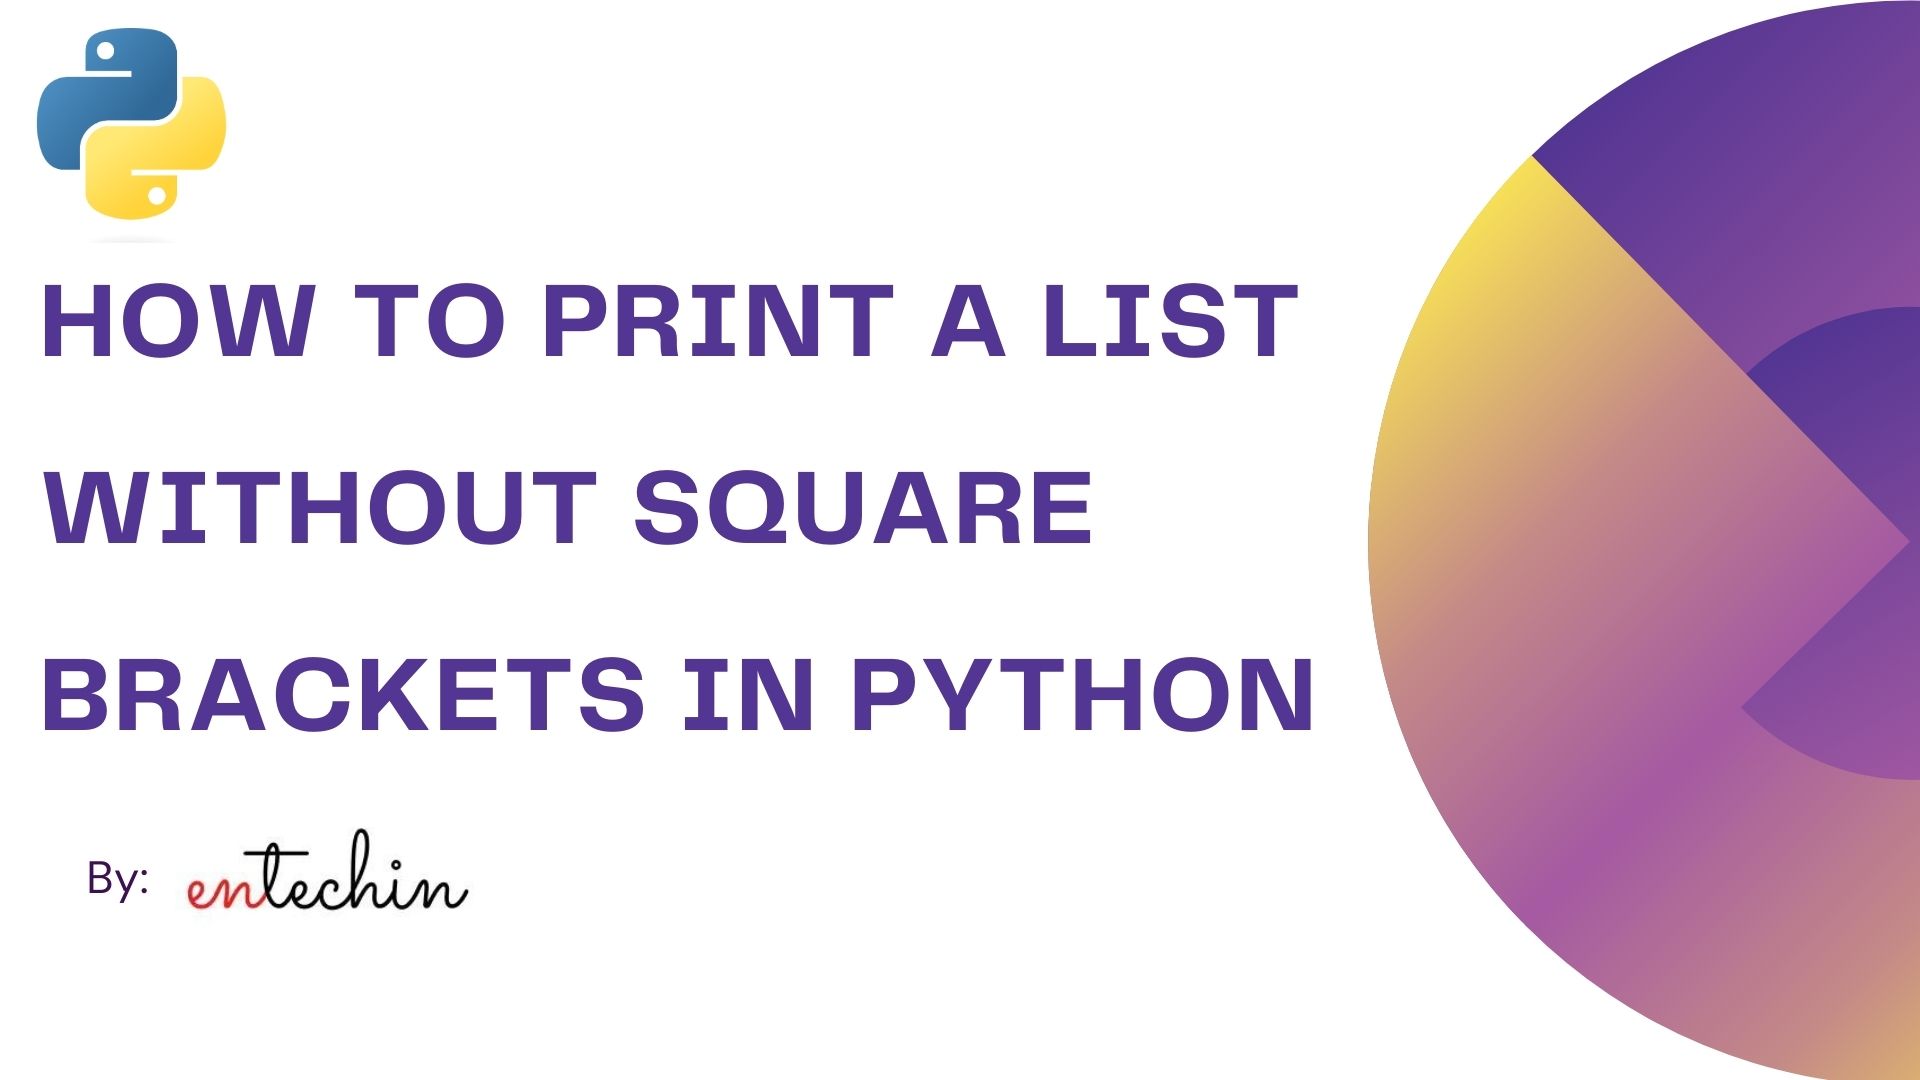 How to Print a List Without Square Brackets in Python